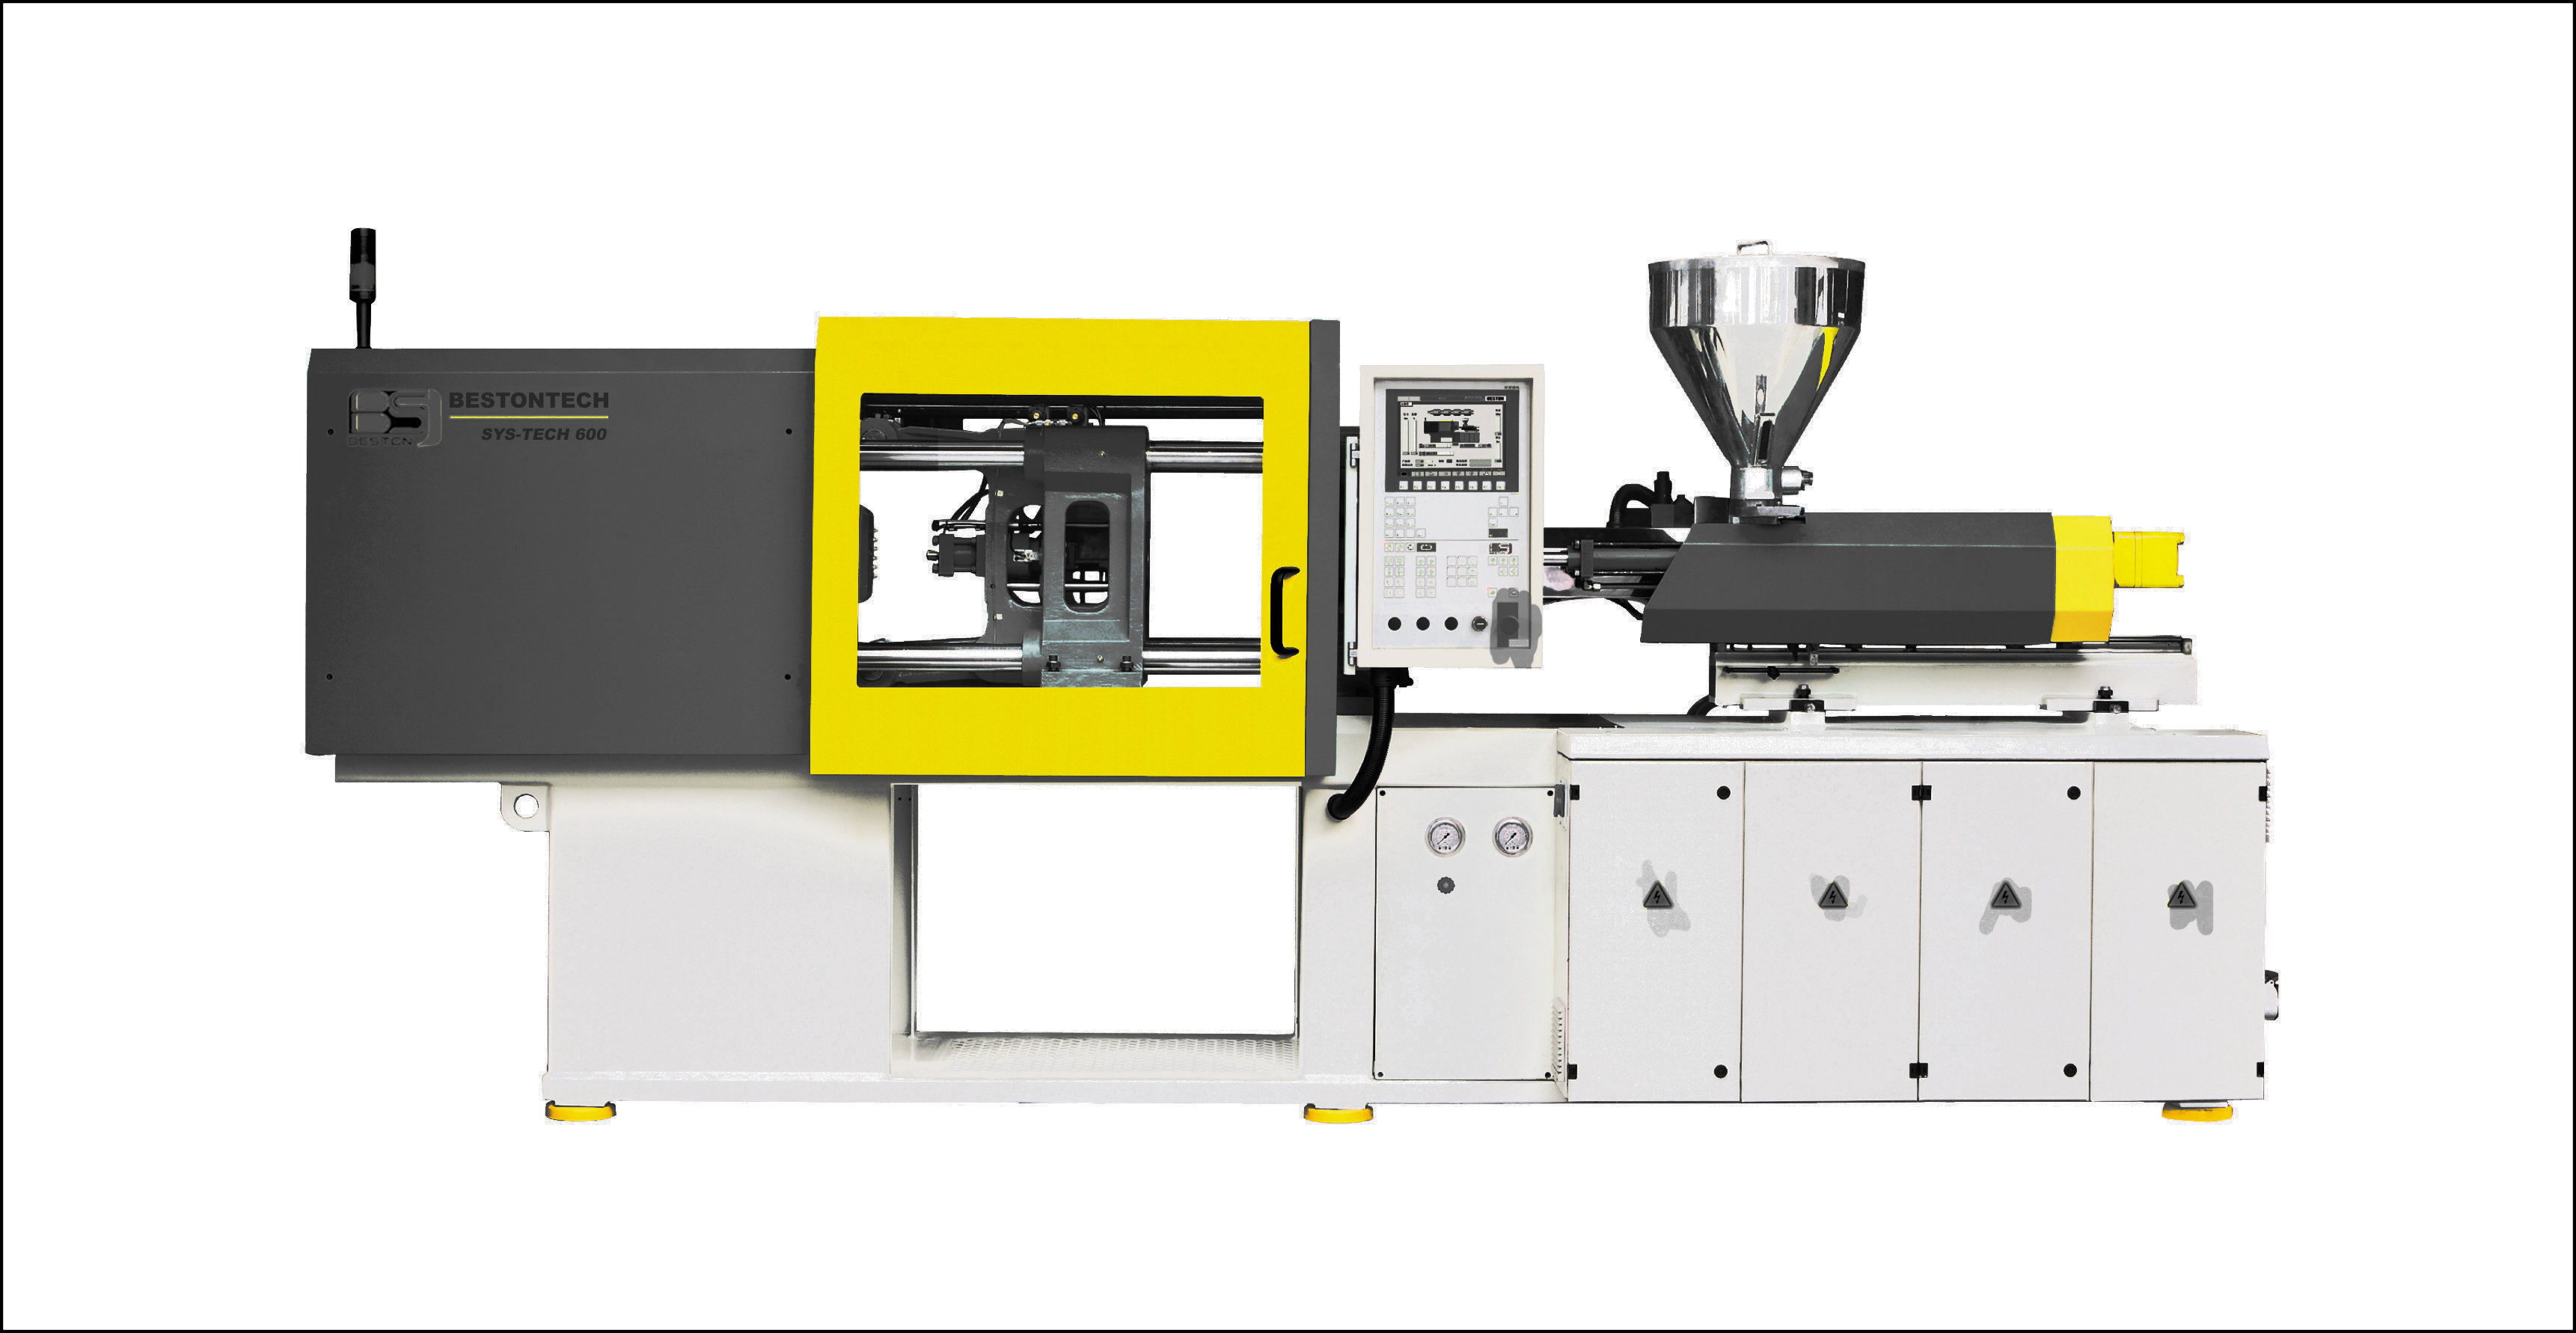 The Beston SYS Series 600 injection molding machine.